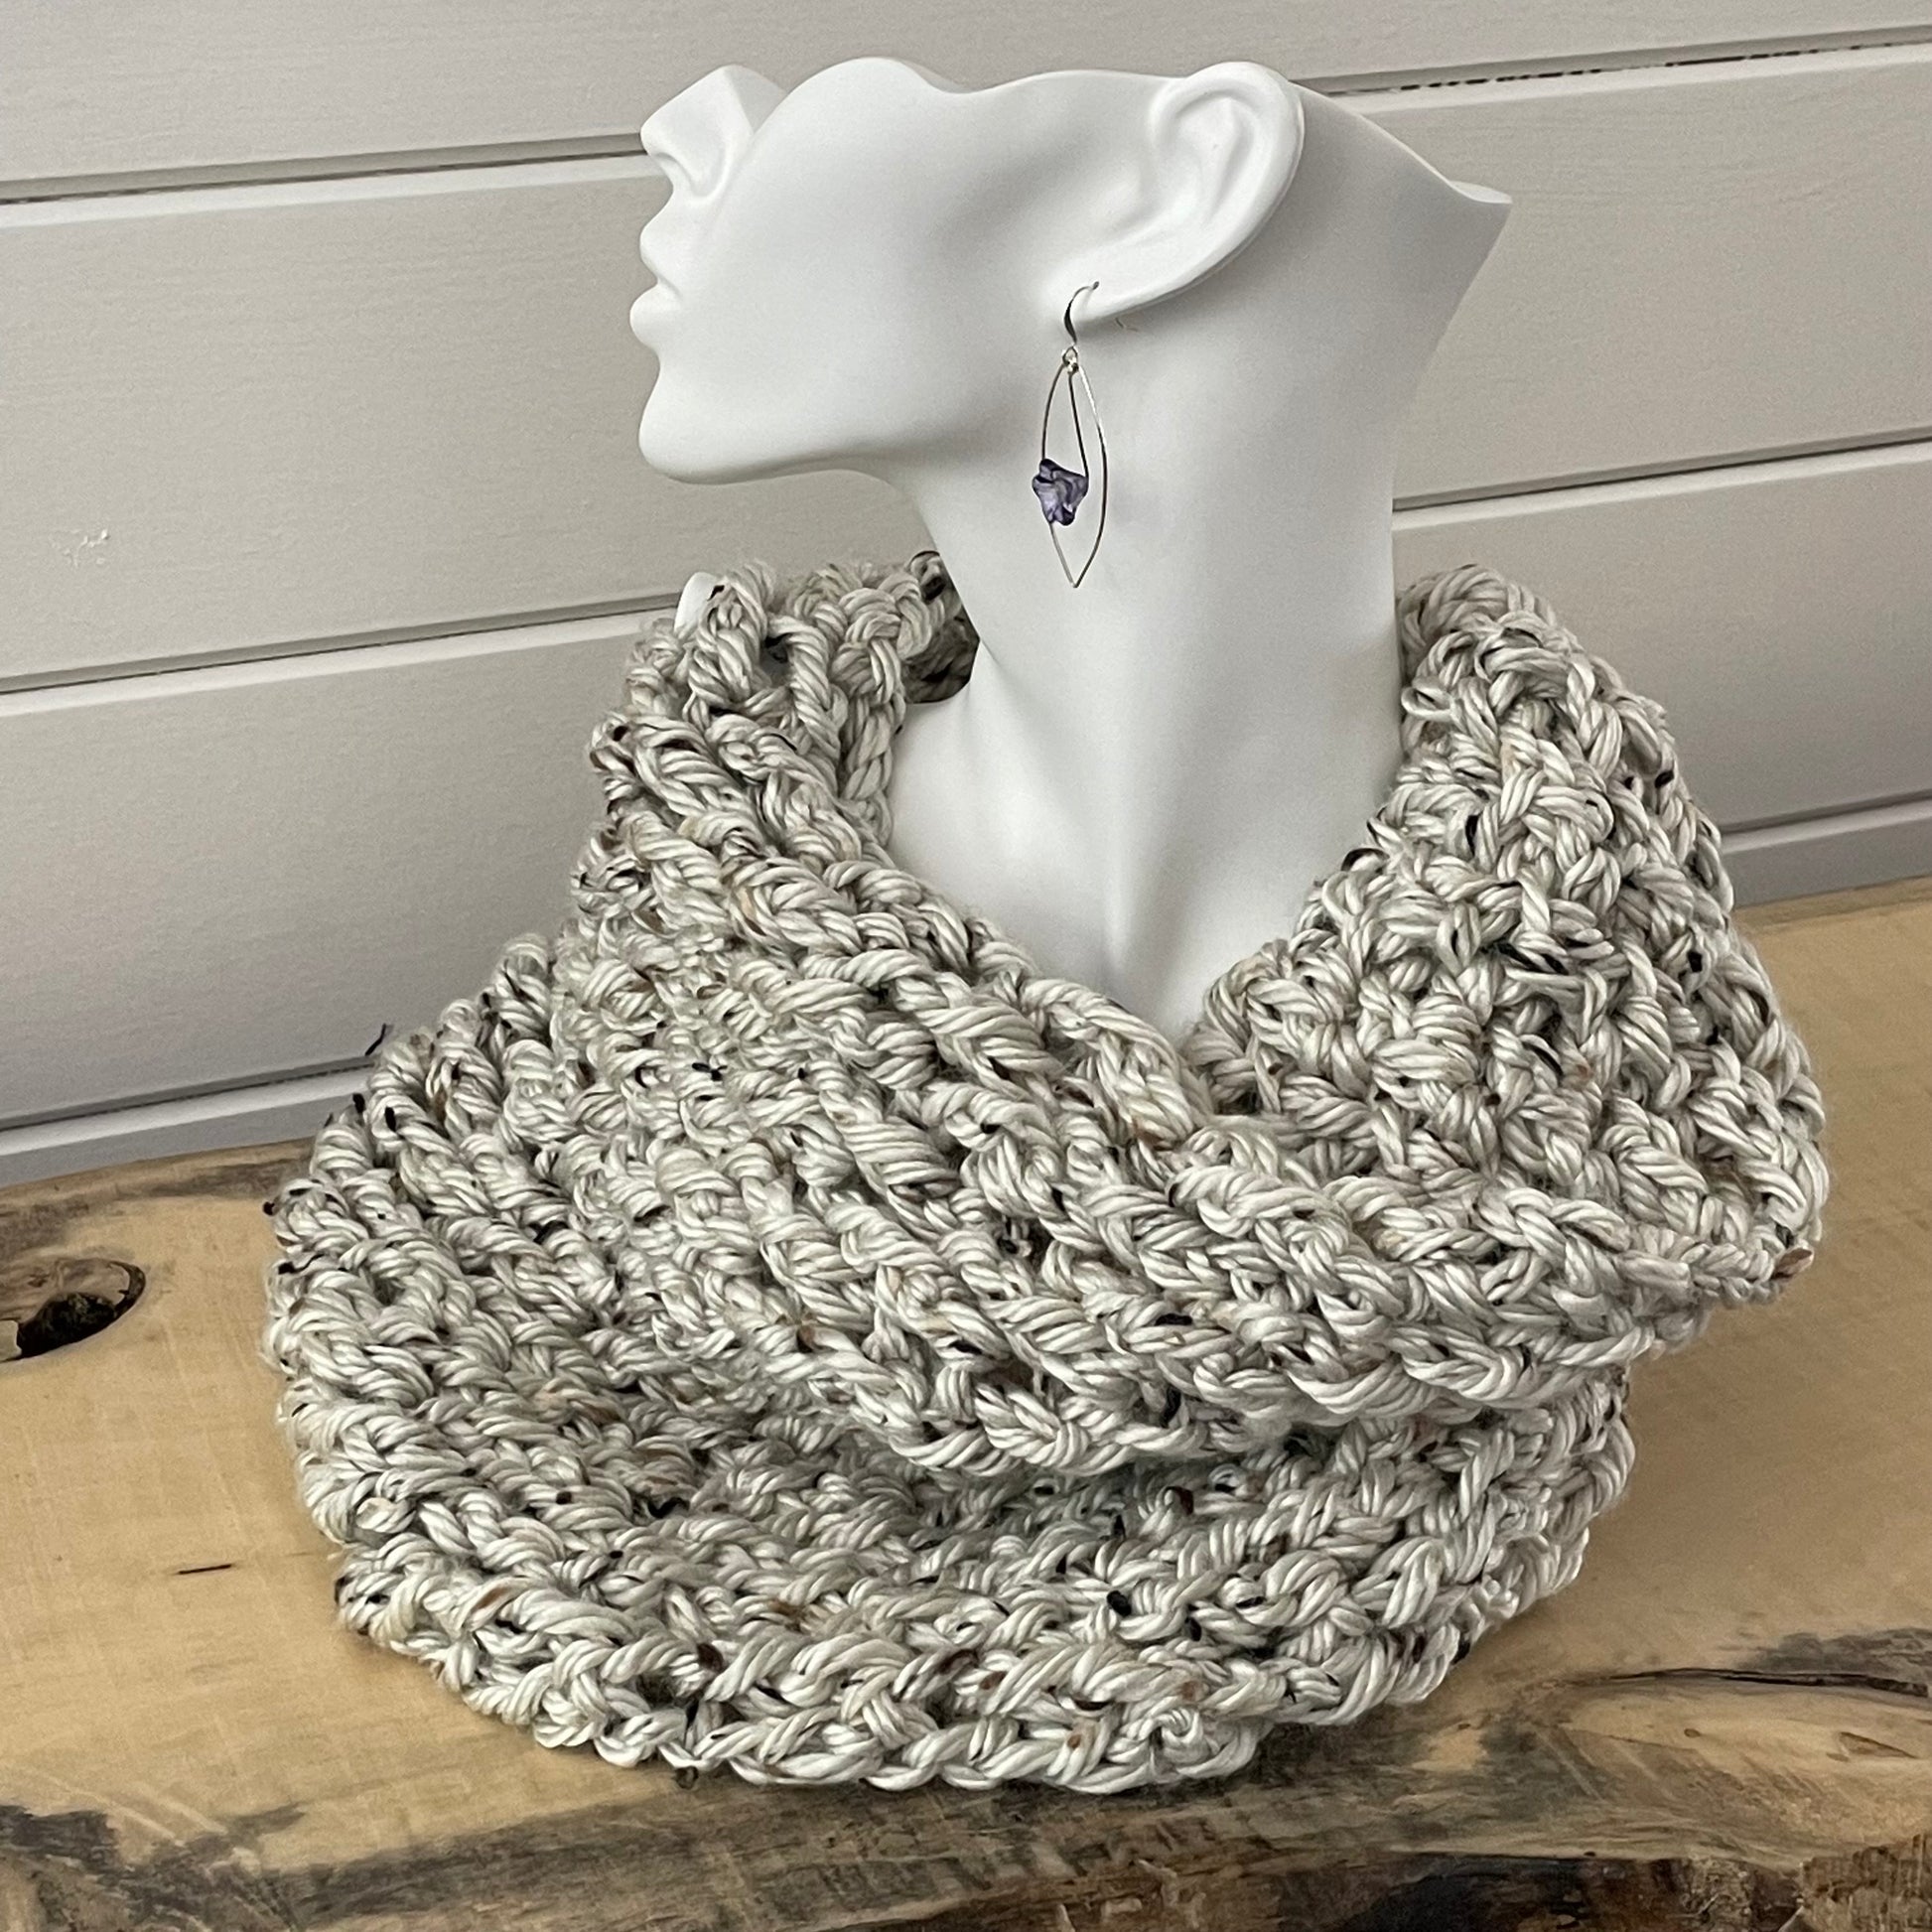 Extra Soft Marbled Wheat Chunky Cowl Infinity Scarf 13.5" Acrylic Rayon Blend Multicolor Hand Crochet Unisex Fall Winter--open throat view